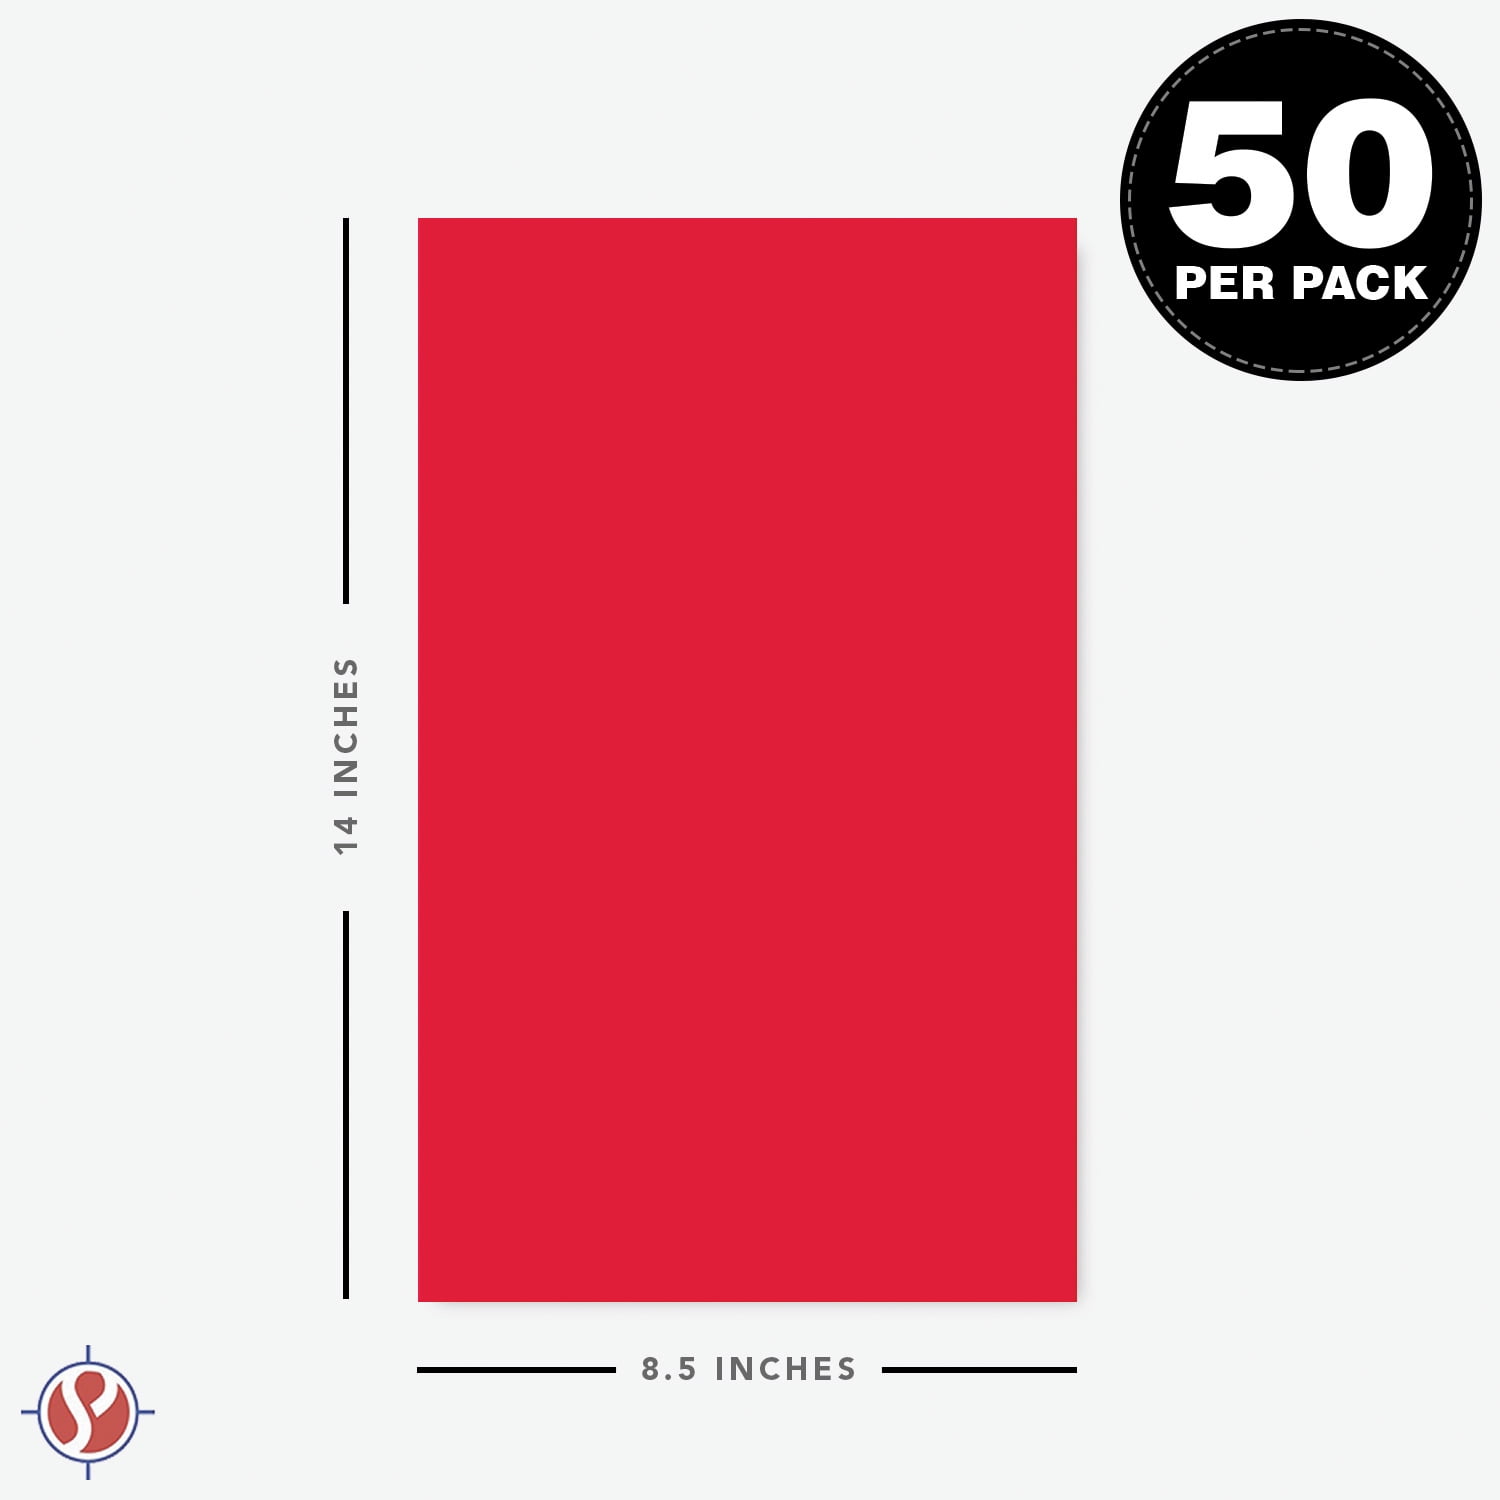 Jam Paper Legal Colored 24lb Paper 8.5 X 14 Red Recycled 500 Sheets/ream  101337b : Target